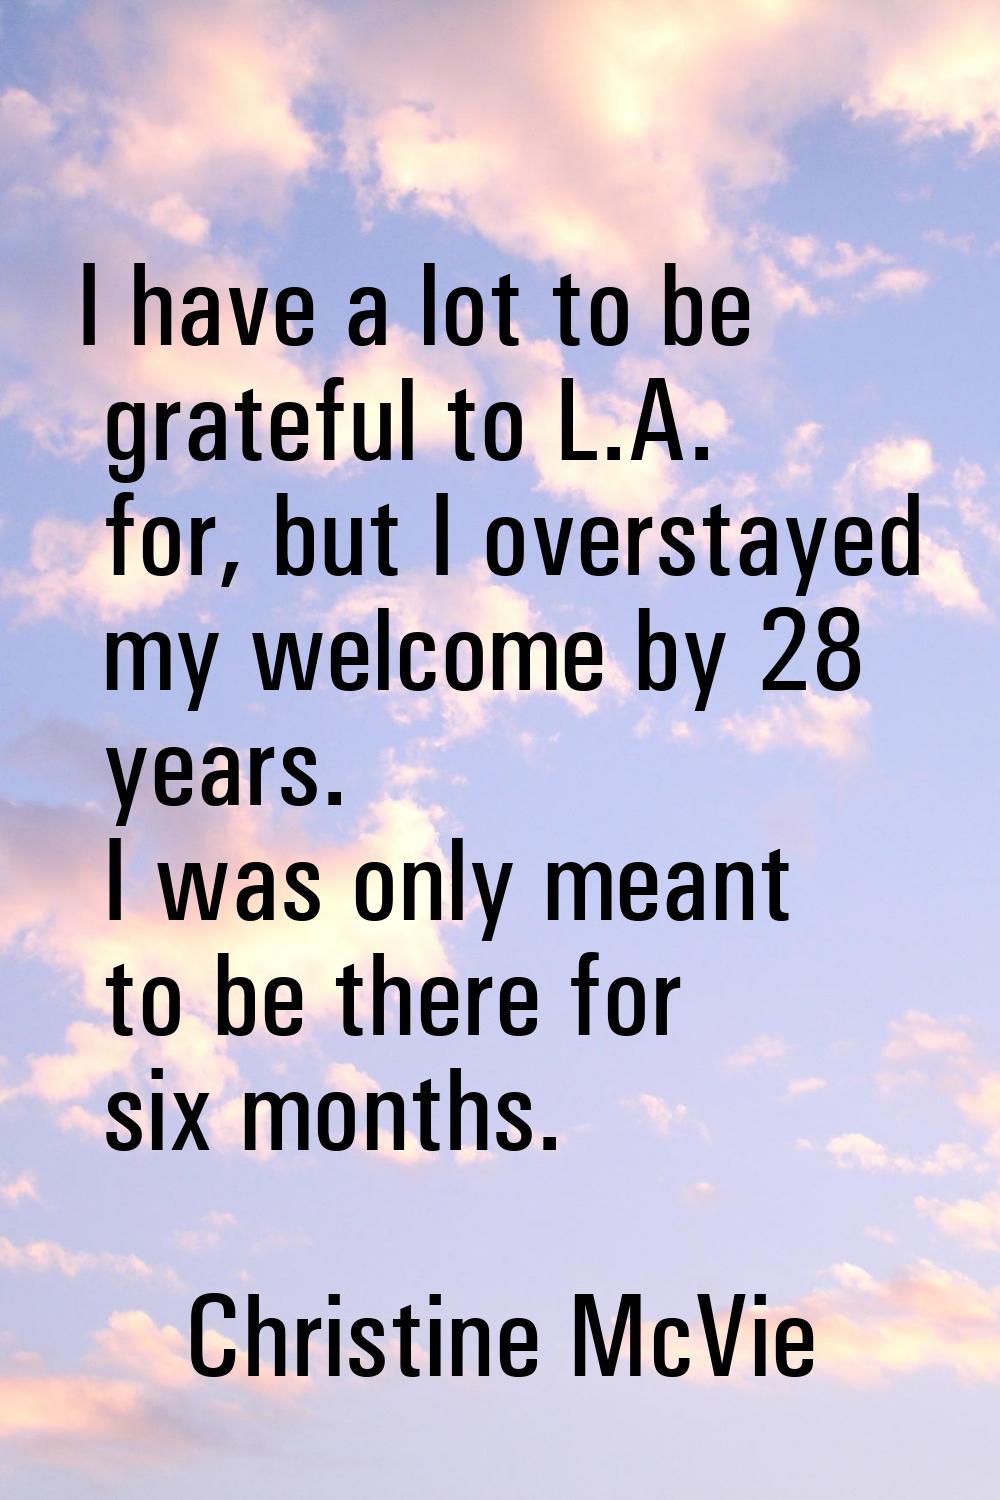 I have a lot to be grateful to L.A. for, but I overstayed my welcome by 28 years. I was only meant 